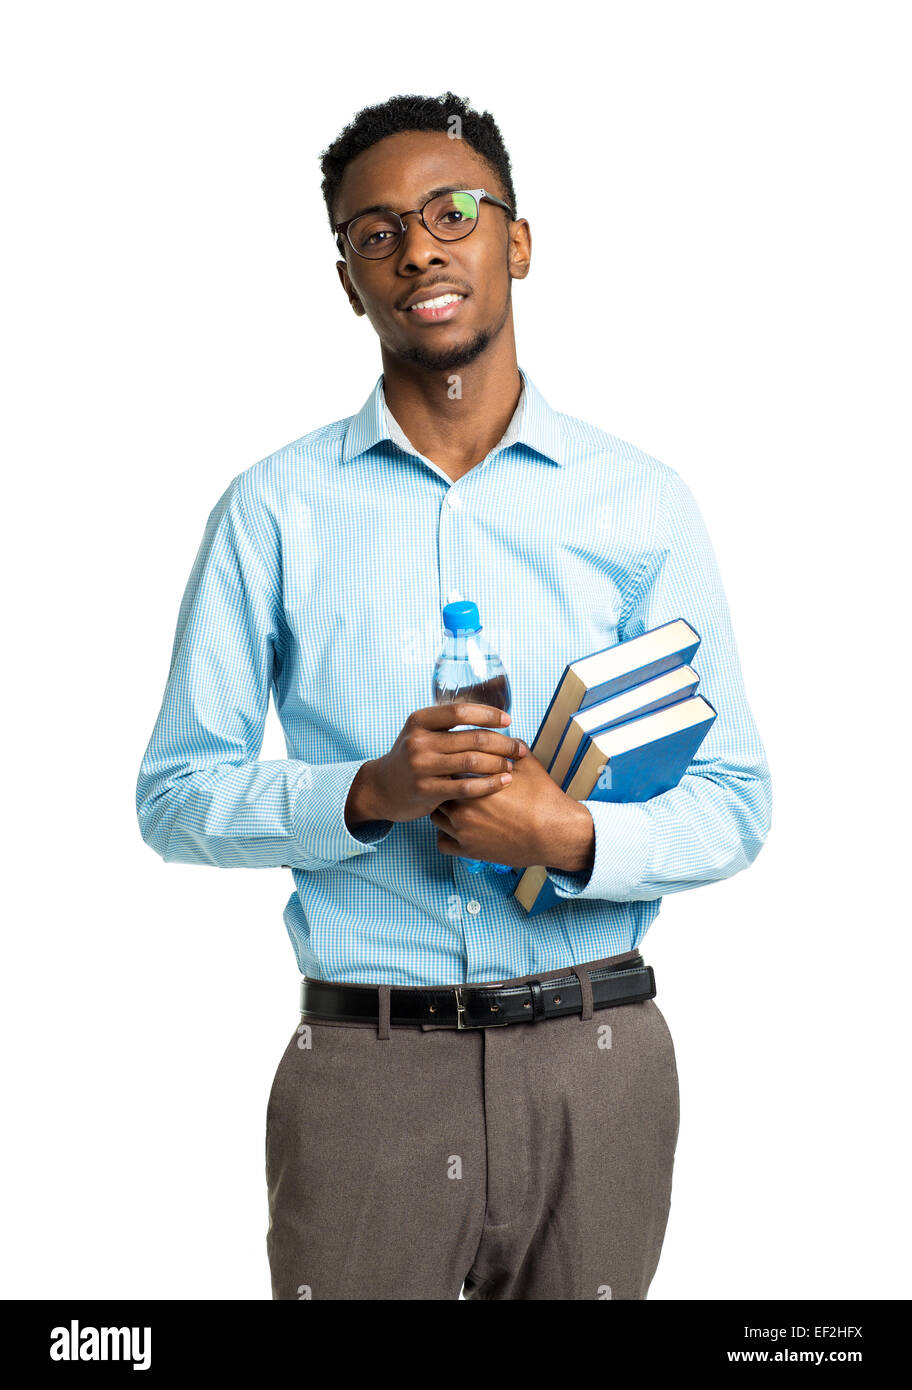 Happy african american college student standing with books and bottle of water in his hands on white background Stock Photo